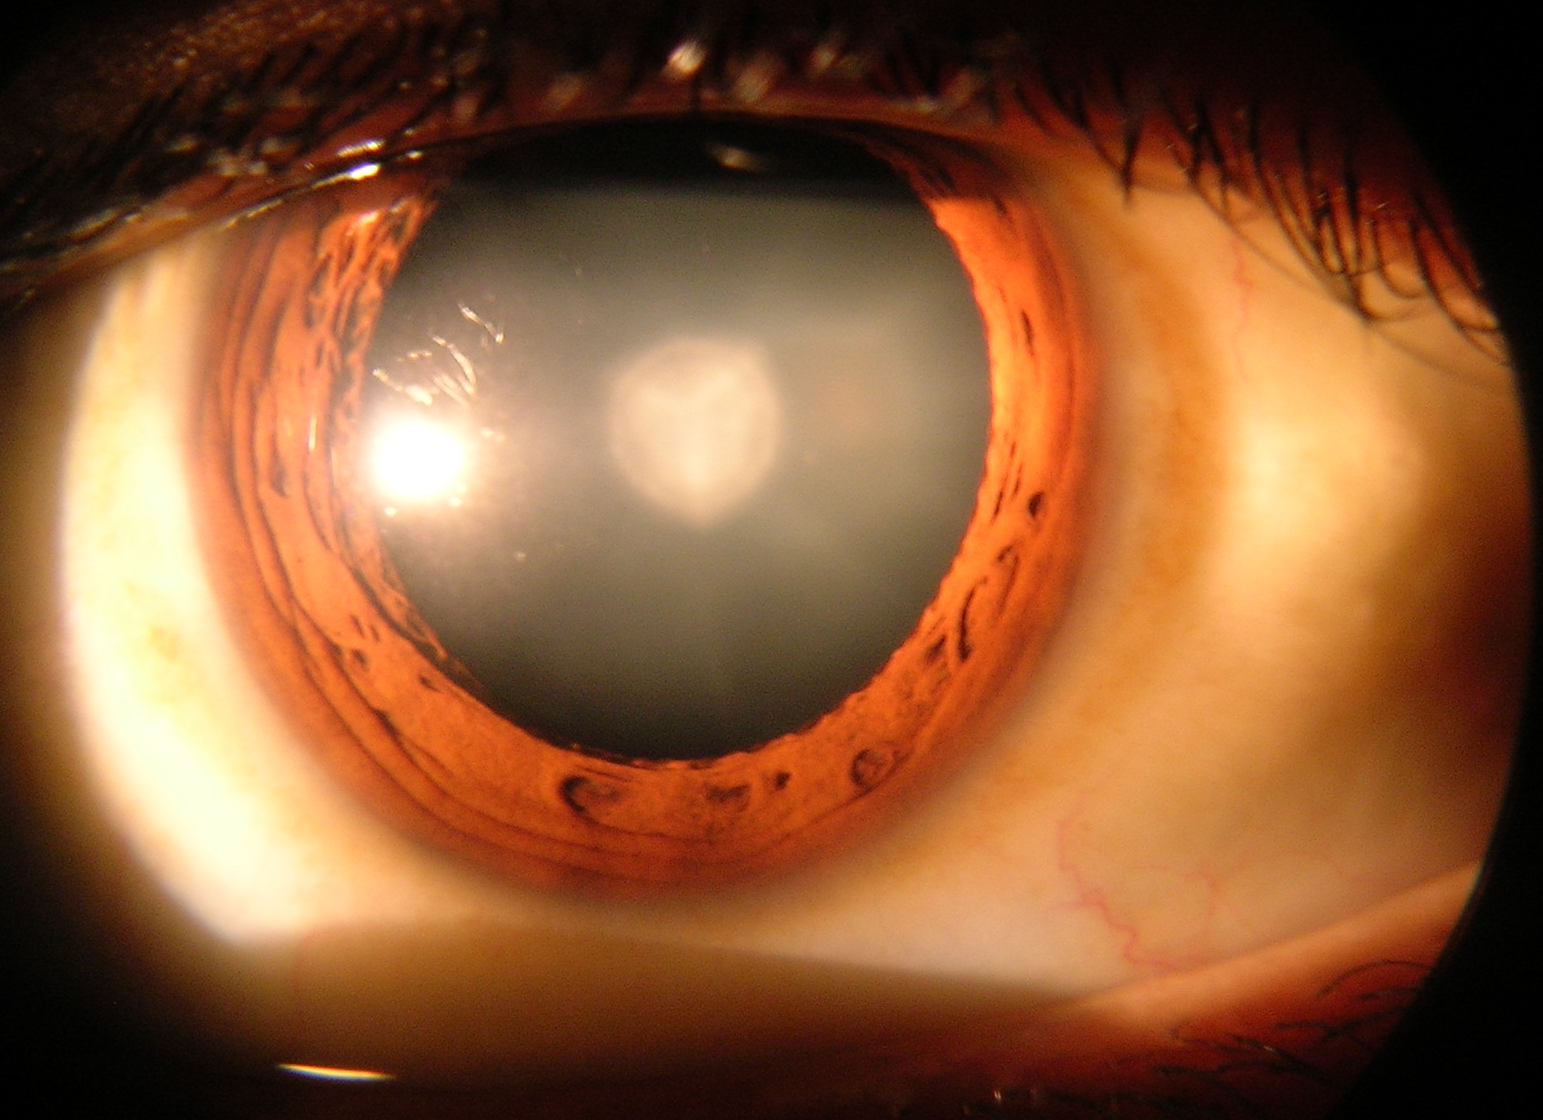 Slit lamp examination of a patient with early stage immature cataract